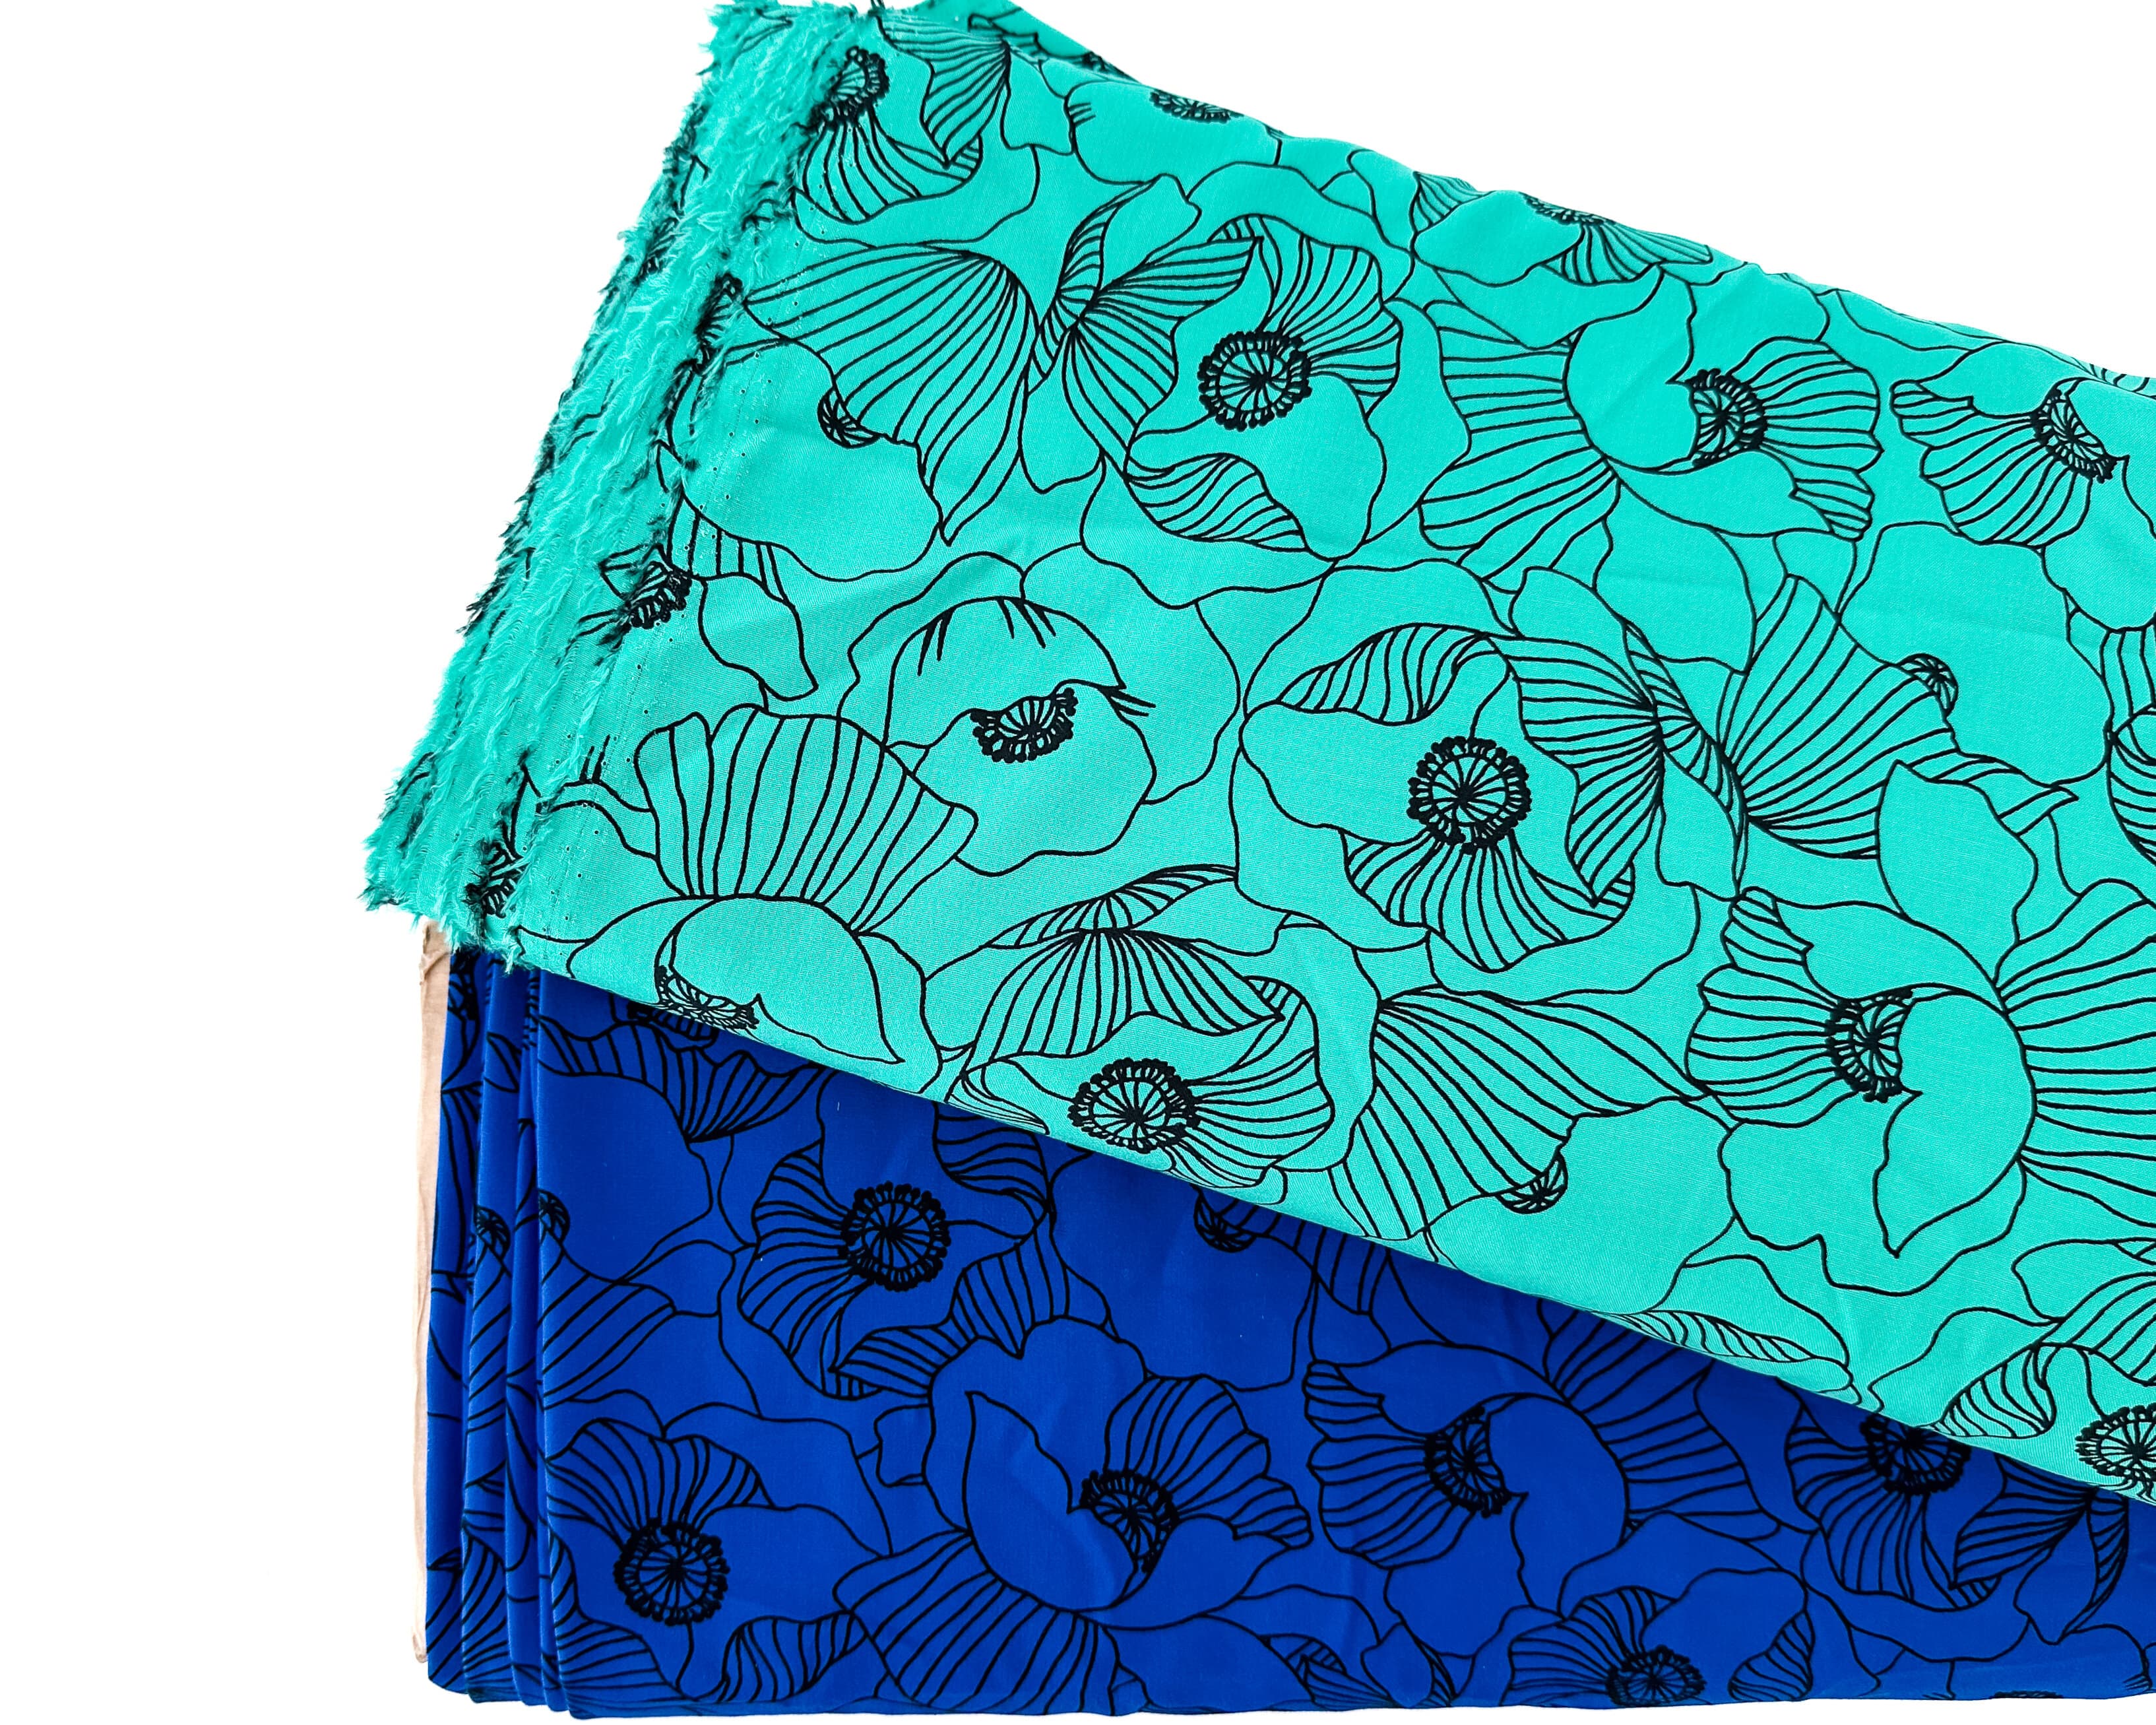 Two bold designs from our latest designer deadstock fabric drop are featured. One in a vibrant green shade with hand drawn style poppies. The second fabric features the same design in a vibrant cobalt shade. Designer Deadstock fabric NZ 